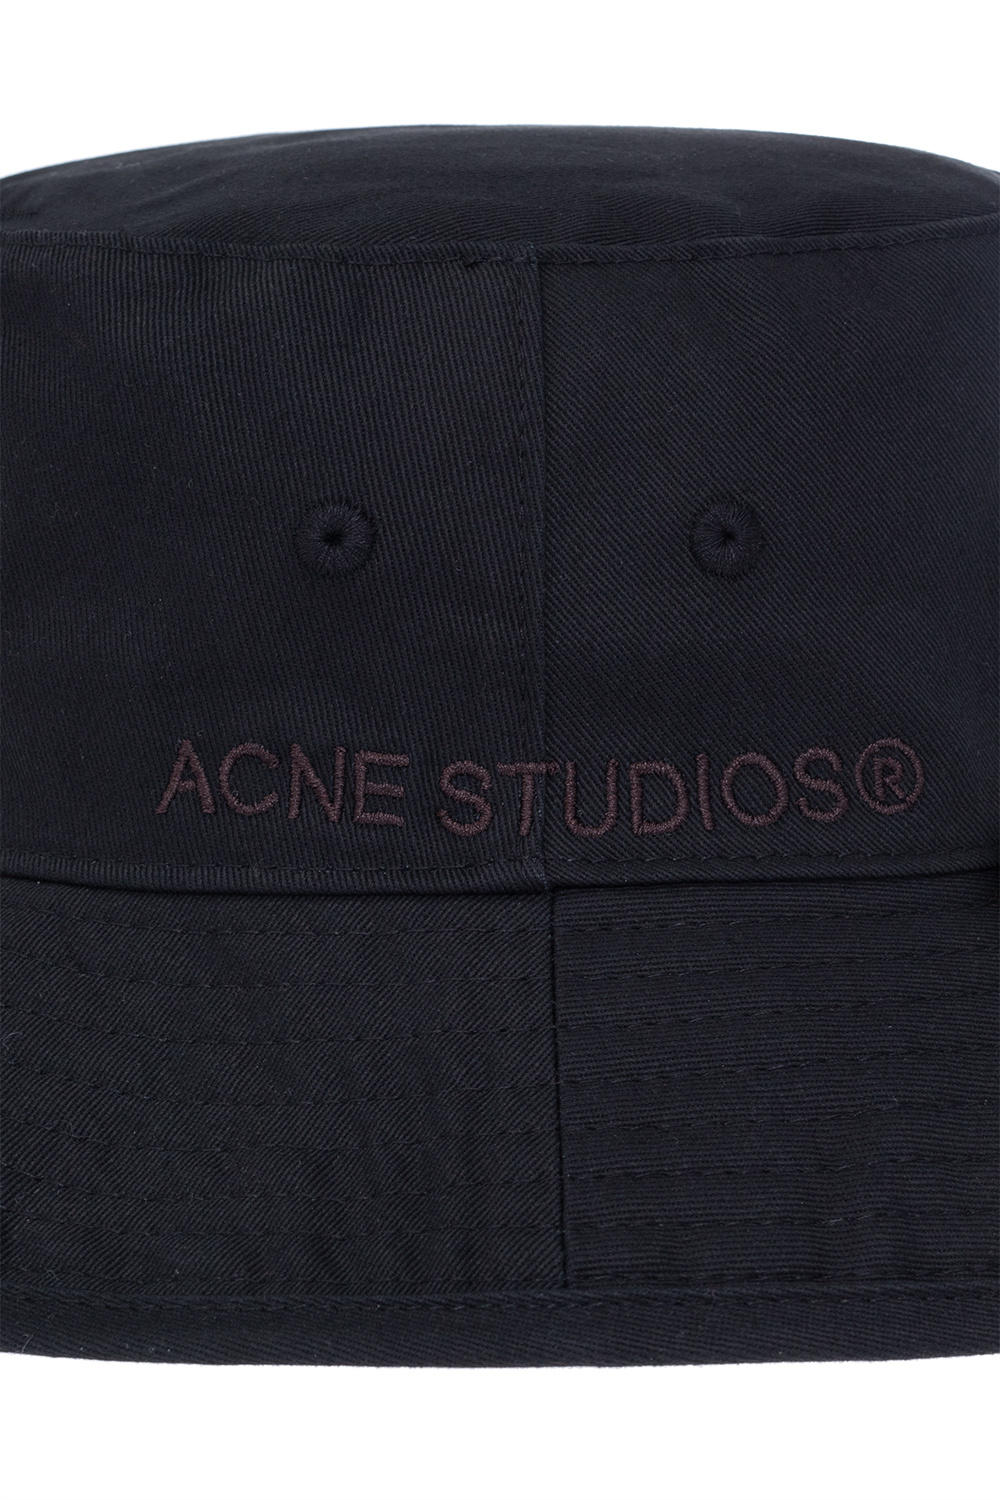 Acne Studios Gucci Kids Teen Knitted Hats for Kids